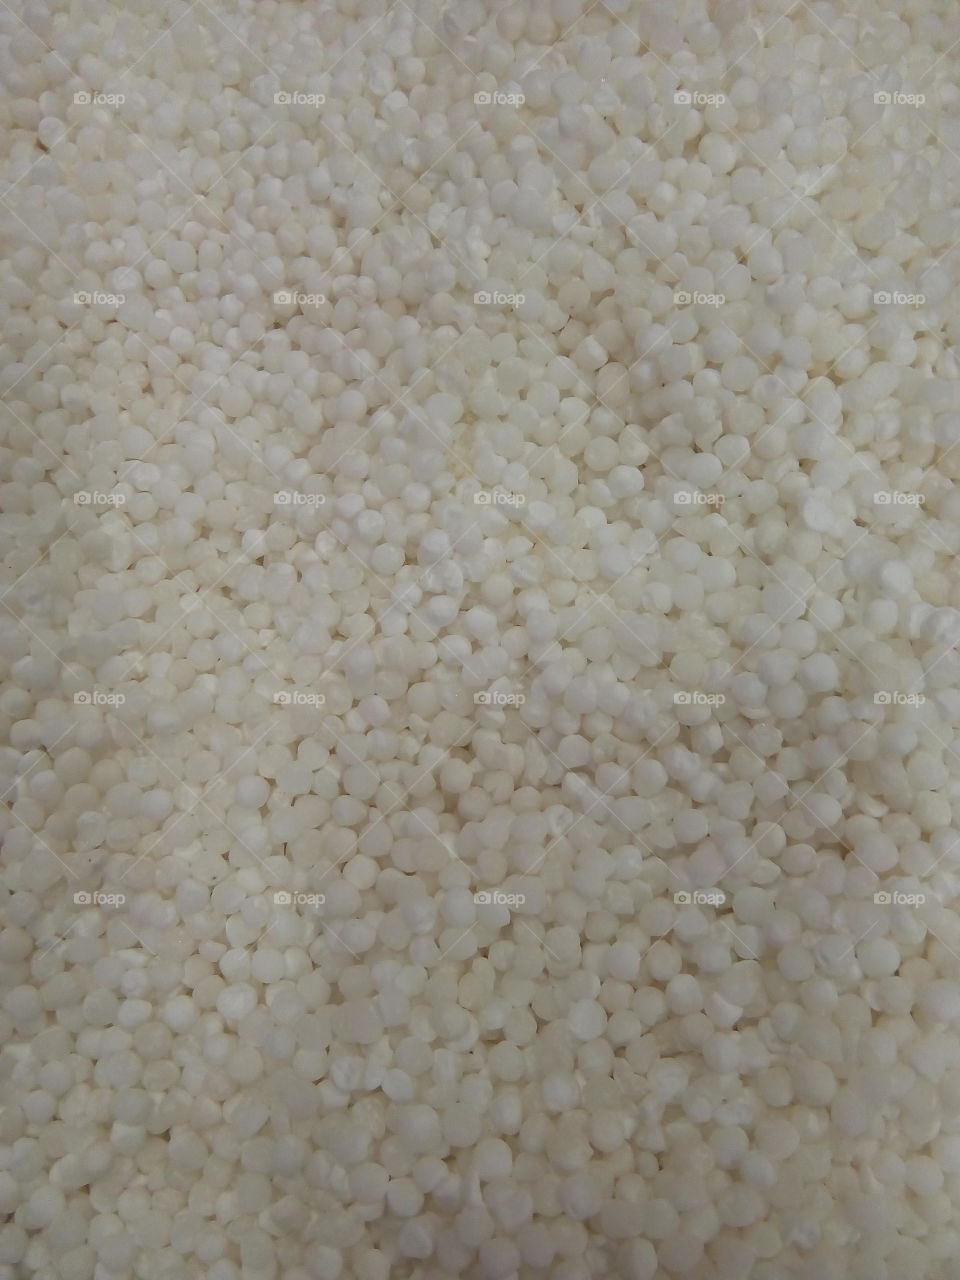 Pearl tapioca (Sabudana)- In India people makes different kinds of tasty dishes from it.